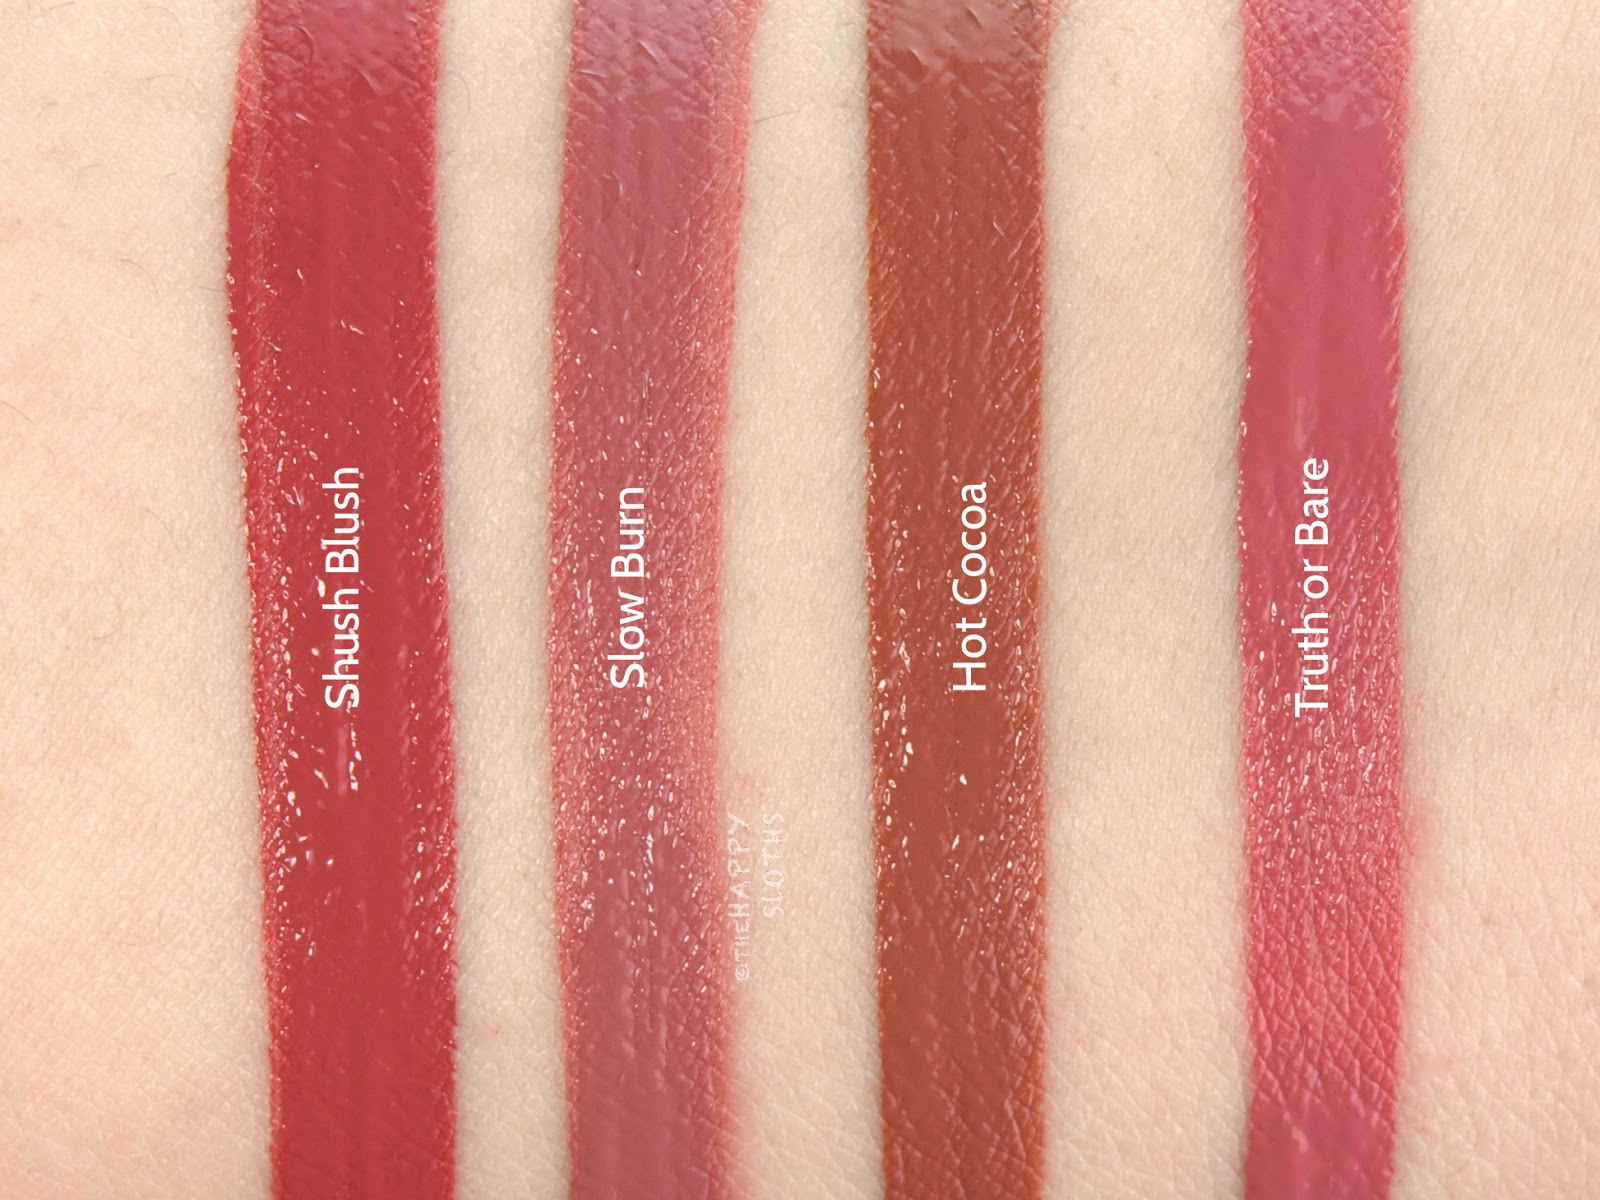 Marc Jacobs Le Marc Liquid Lip Creme: Review and Swatches